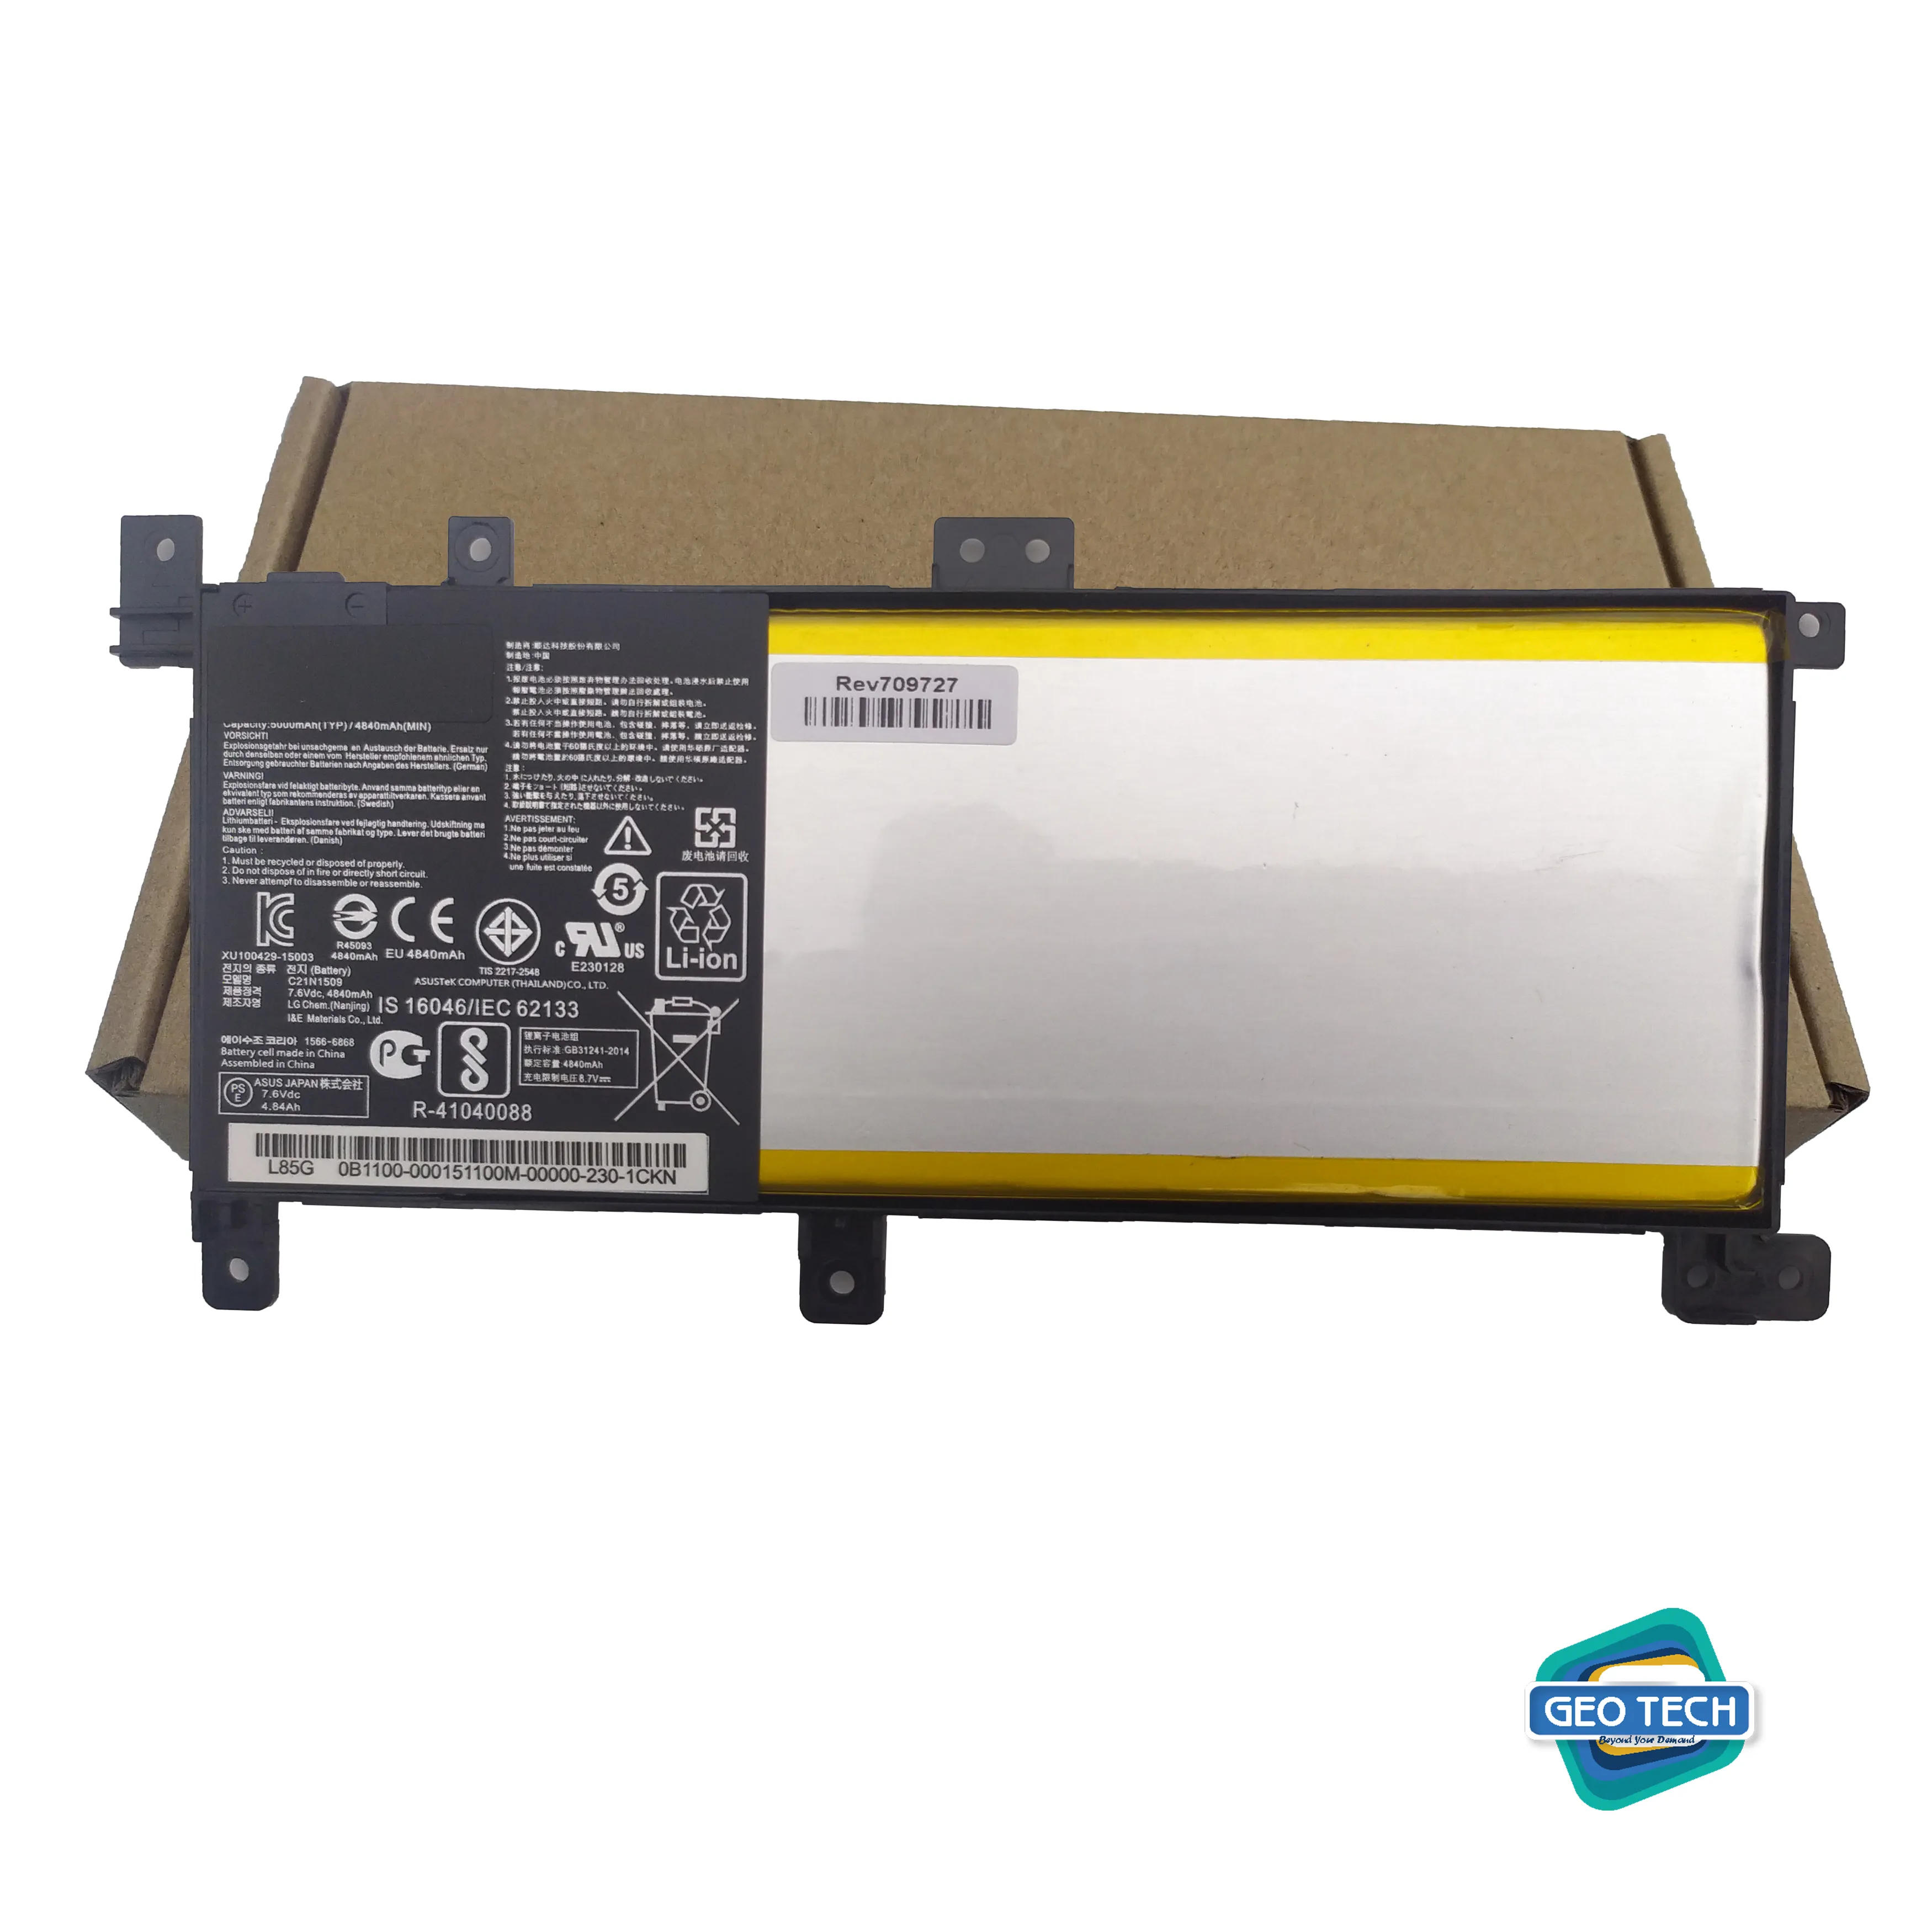 C21N1347 Laptop Battery Compatible with Asus X555 X555L X555LA X555LD F554L F555L X555LB X555LF X555LJ 7.6v 37wh